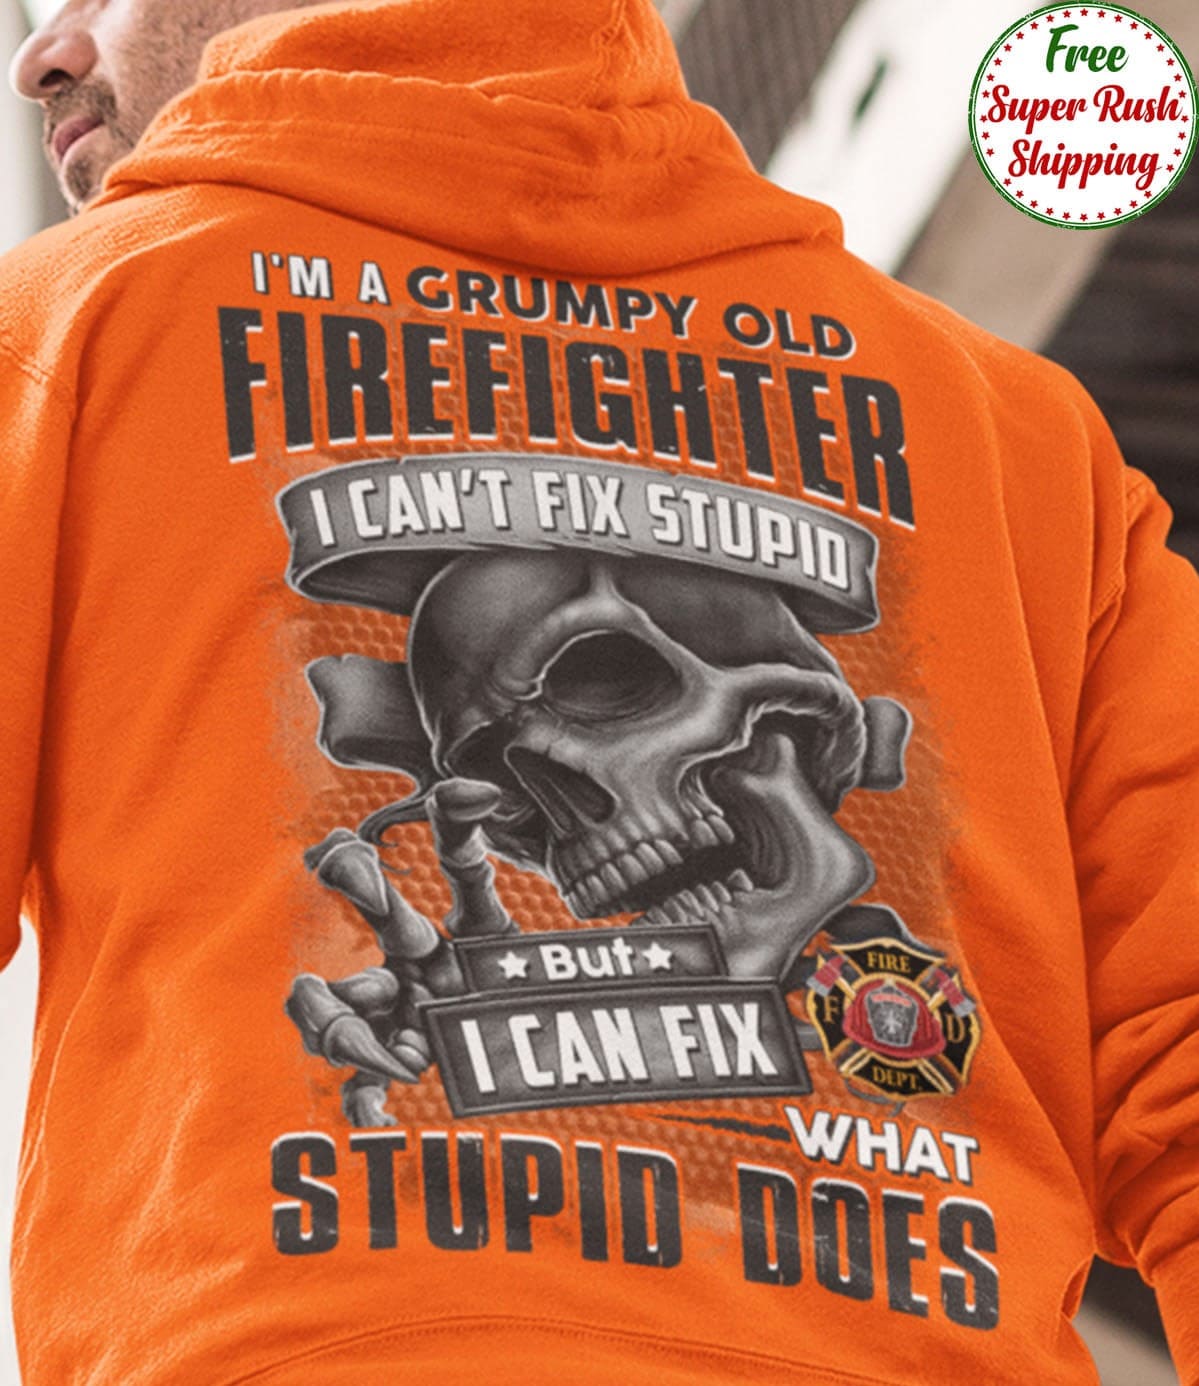 Firefighter Skull - I'm a grumpy old firefighter i can't fix stupid but i can fix what stupid does